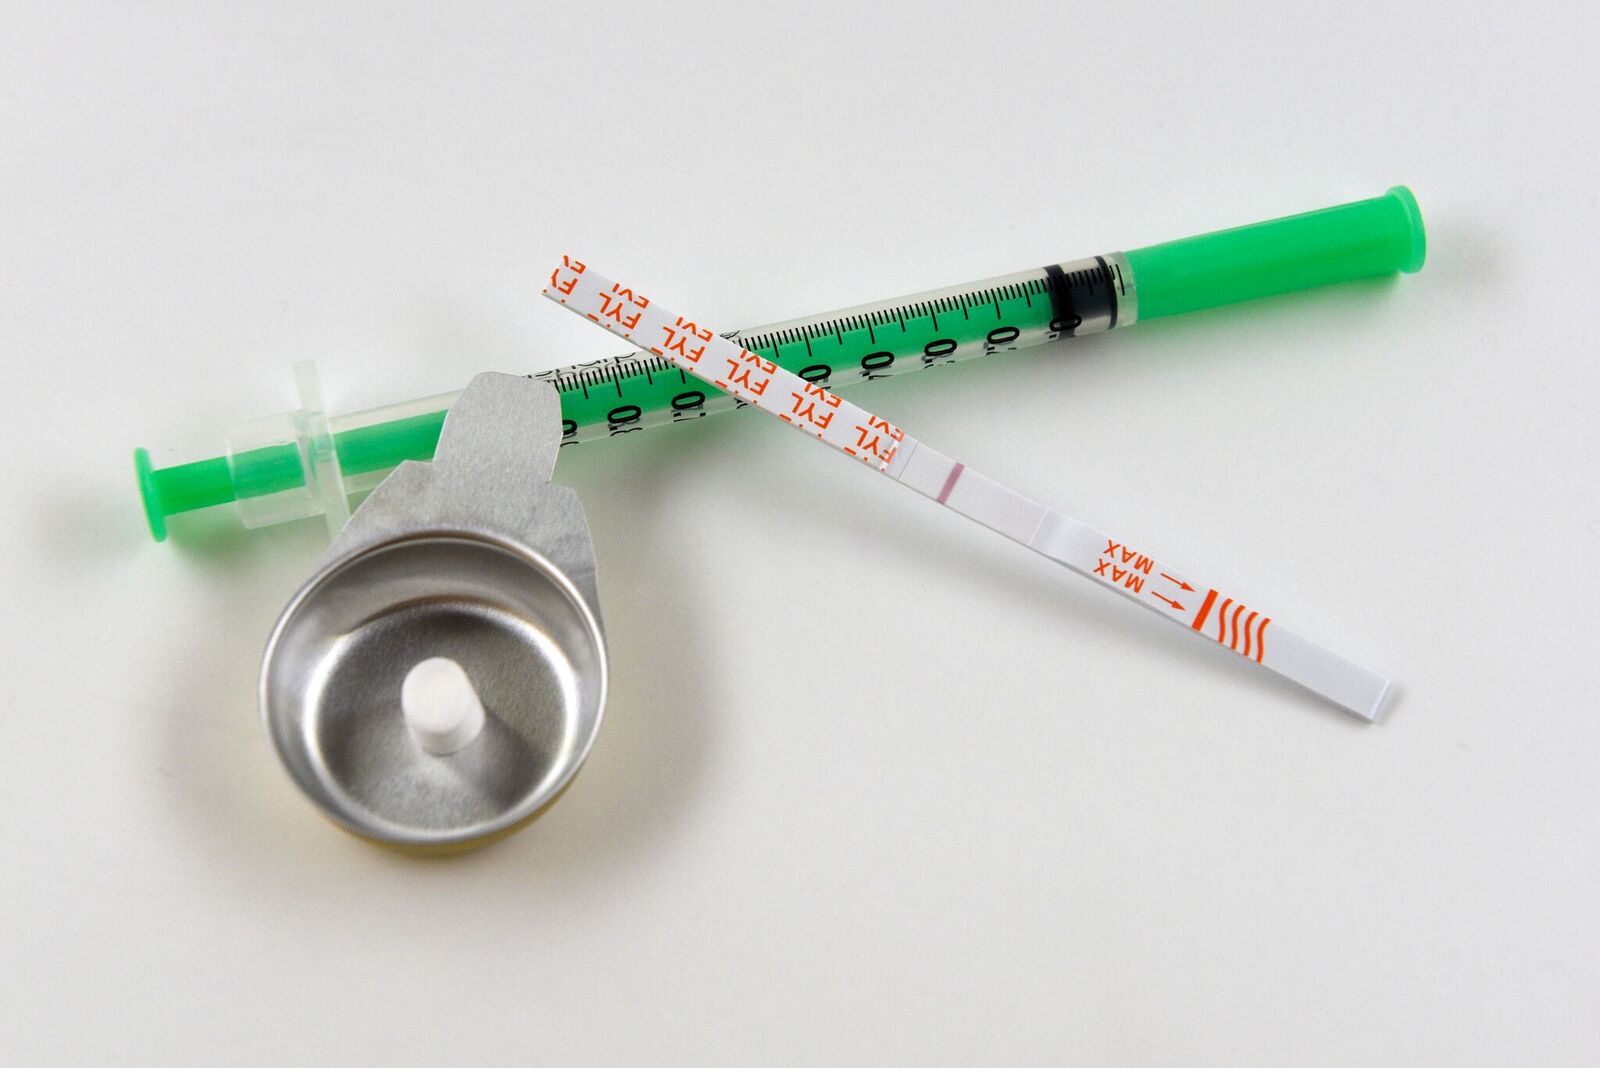 Caption: Test strip_needle and spoon and filter_postive for fentanyl. Credit:  LSHTM/Anne Koerber